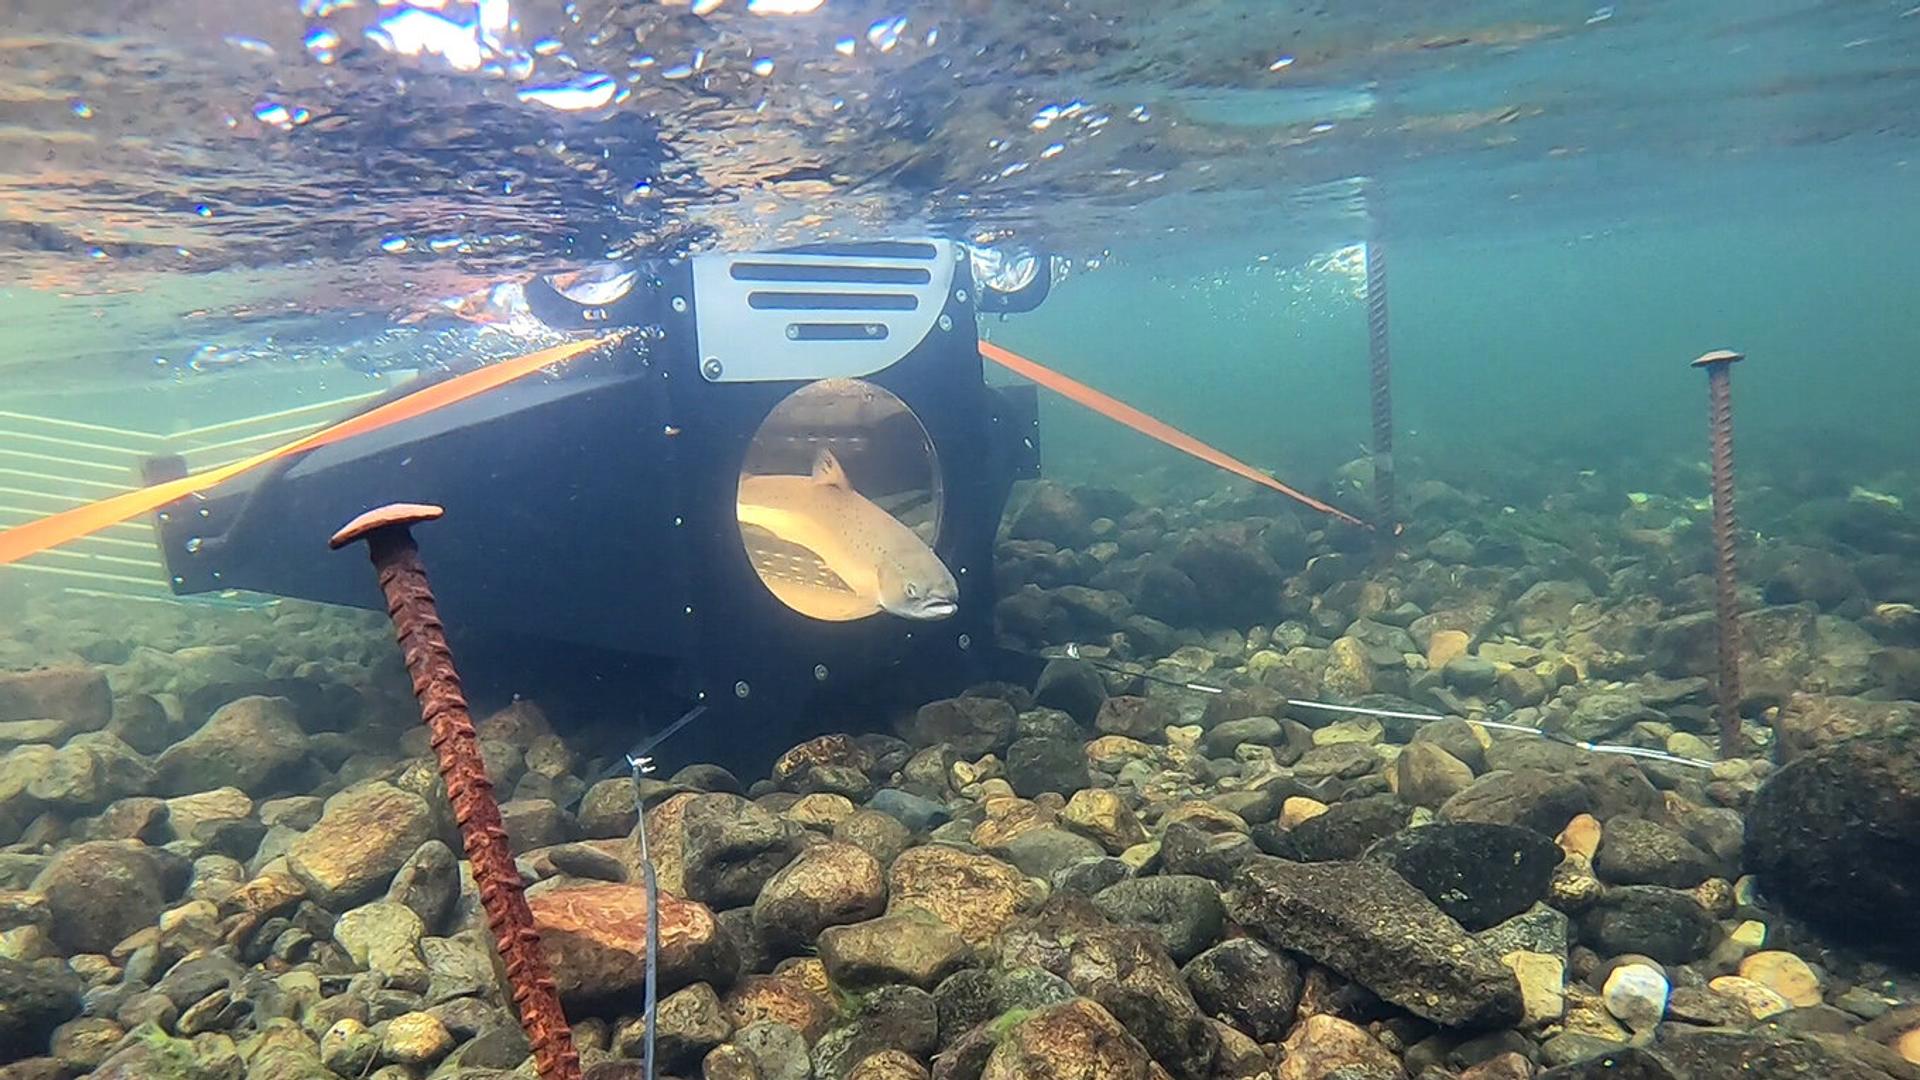 Underwater system for facial recognition of fish